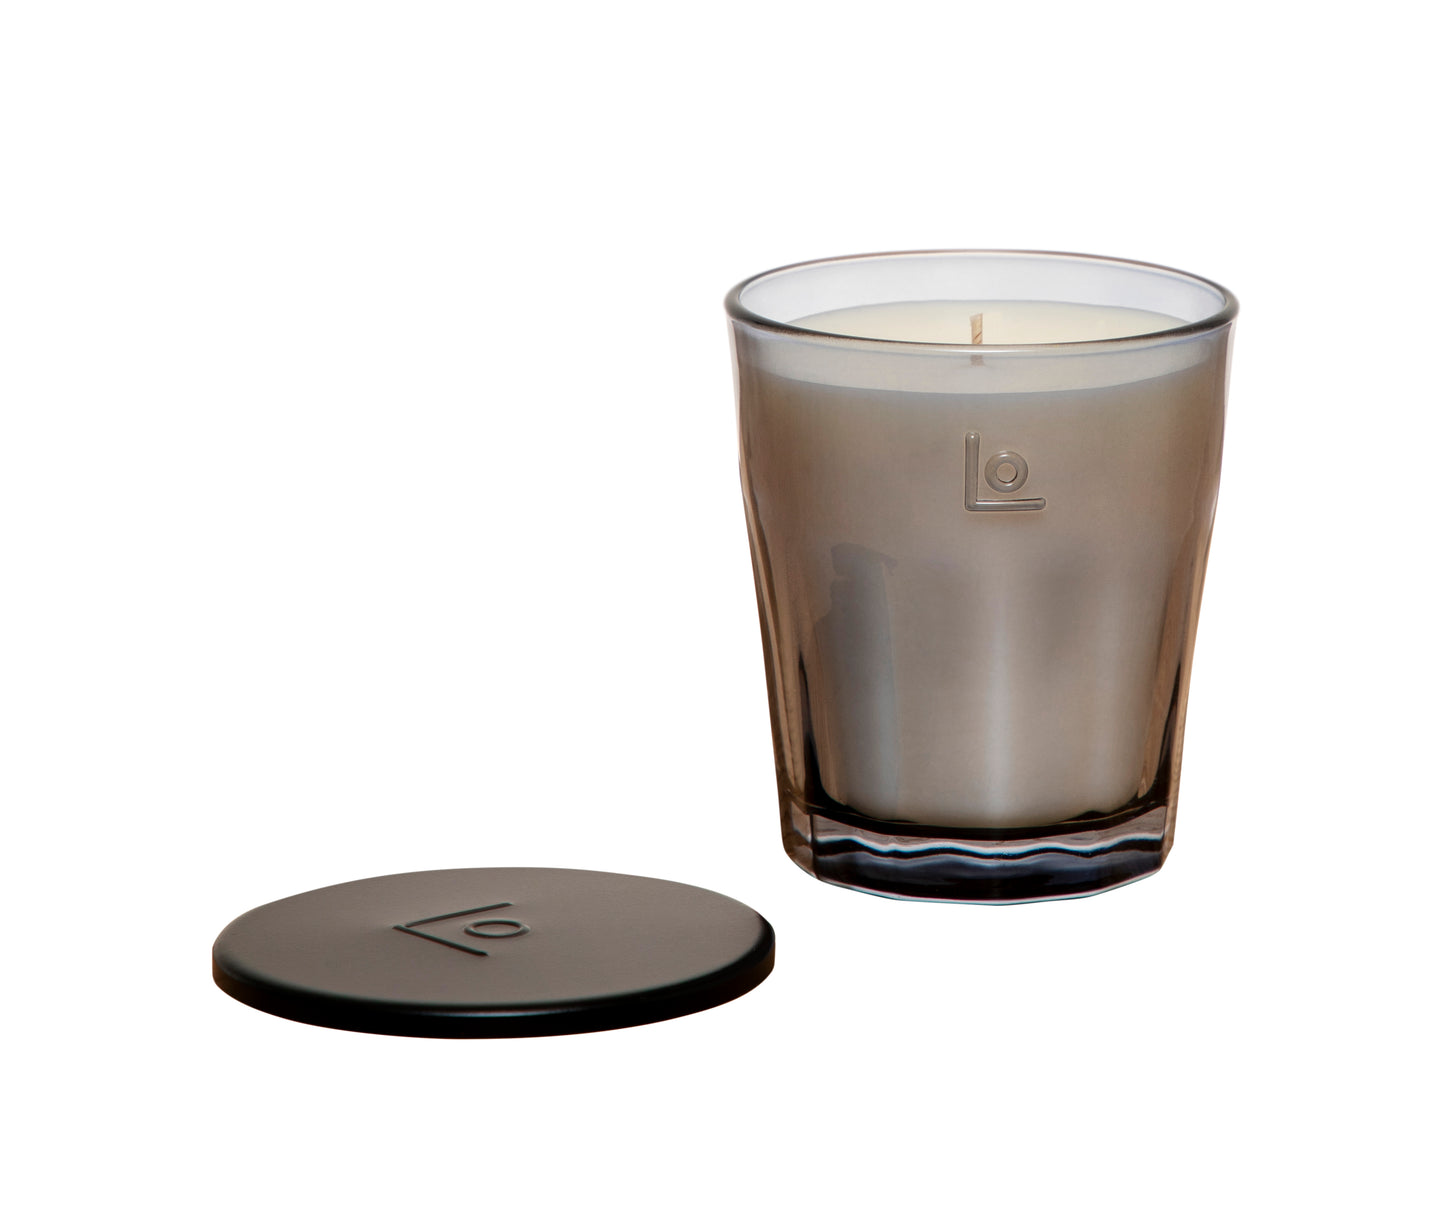 LO. Studio To The Sea 220g Scented Candle